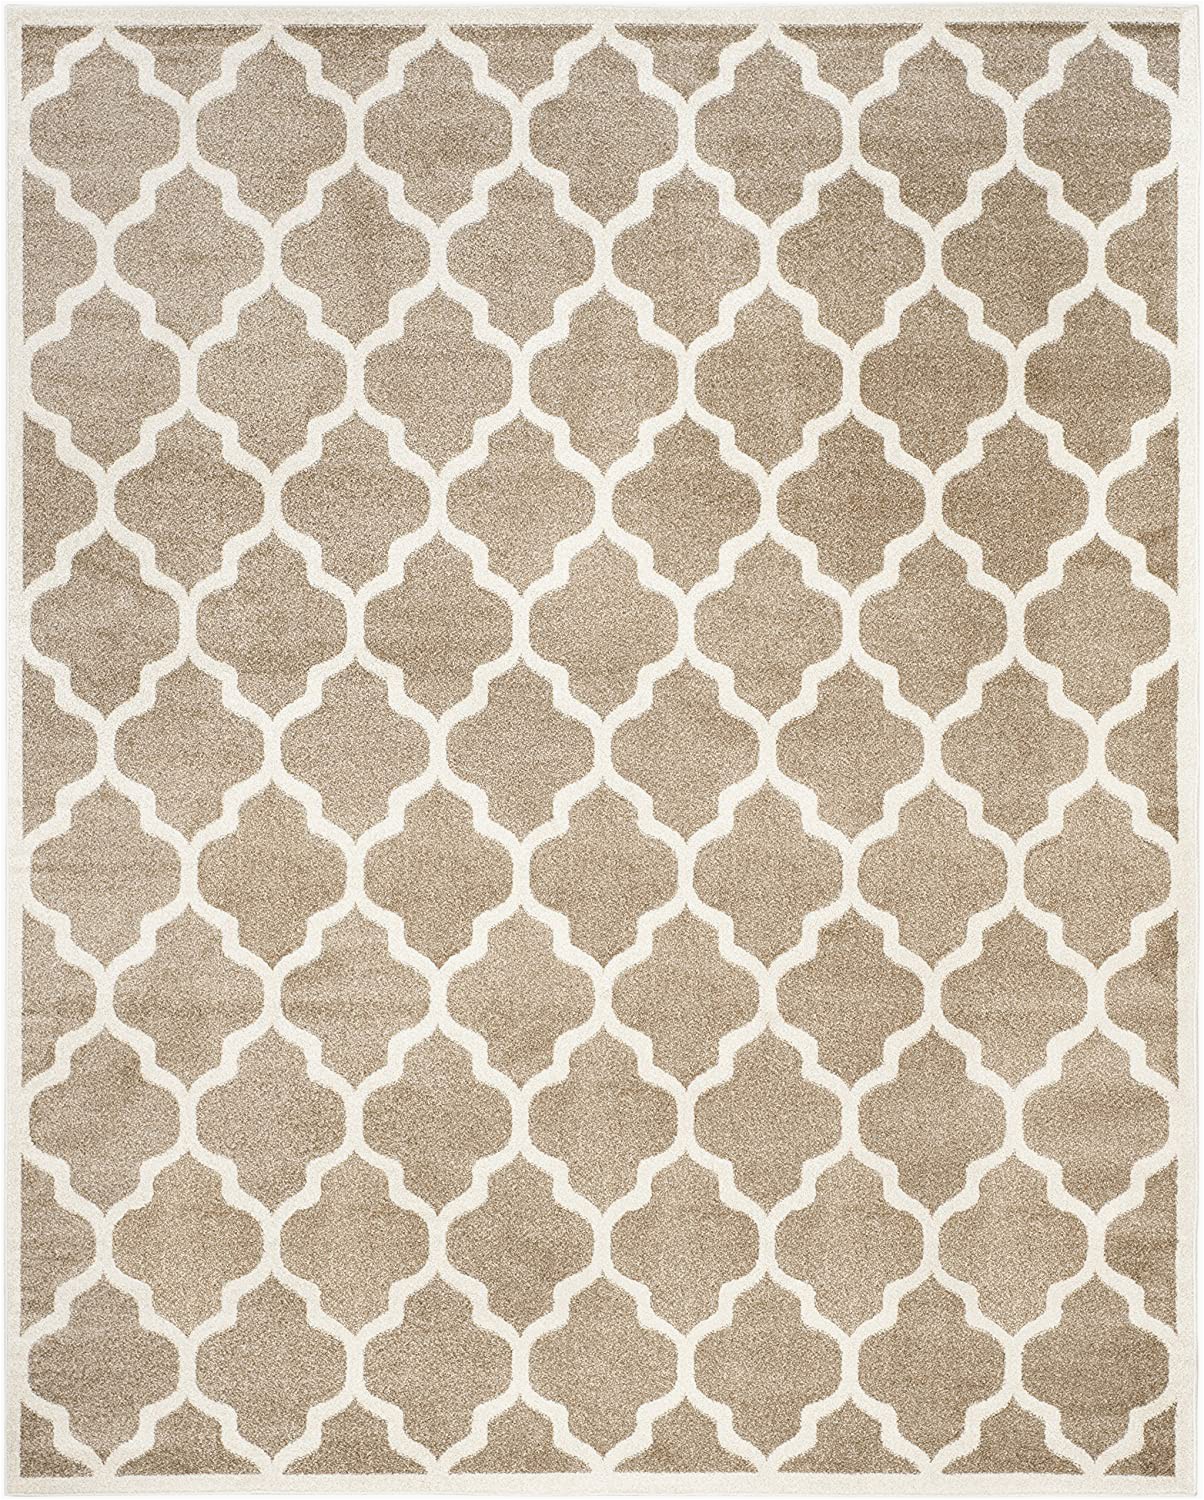 Area Rug 8 X 10 Cheap Safavieh Amherst Collection Amt420s Moroccan Geometric area Rug 8 X 10 Wheat Beige